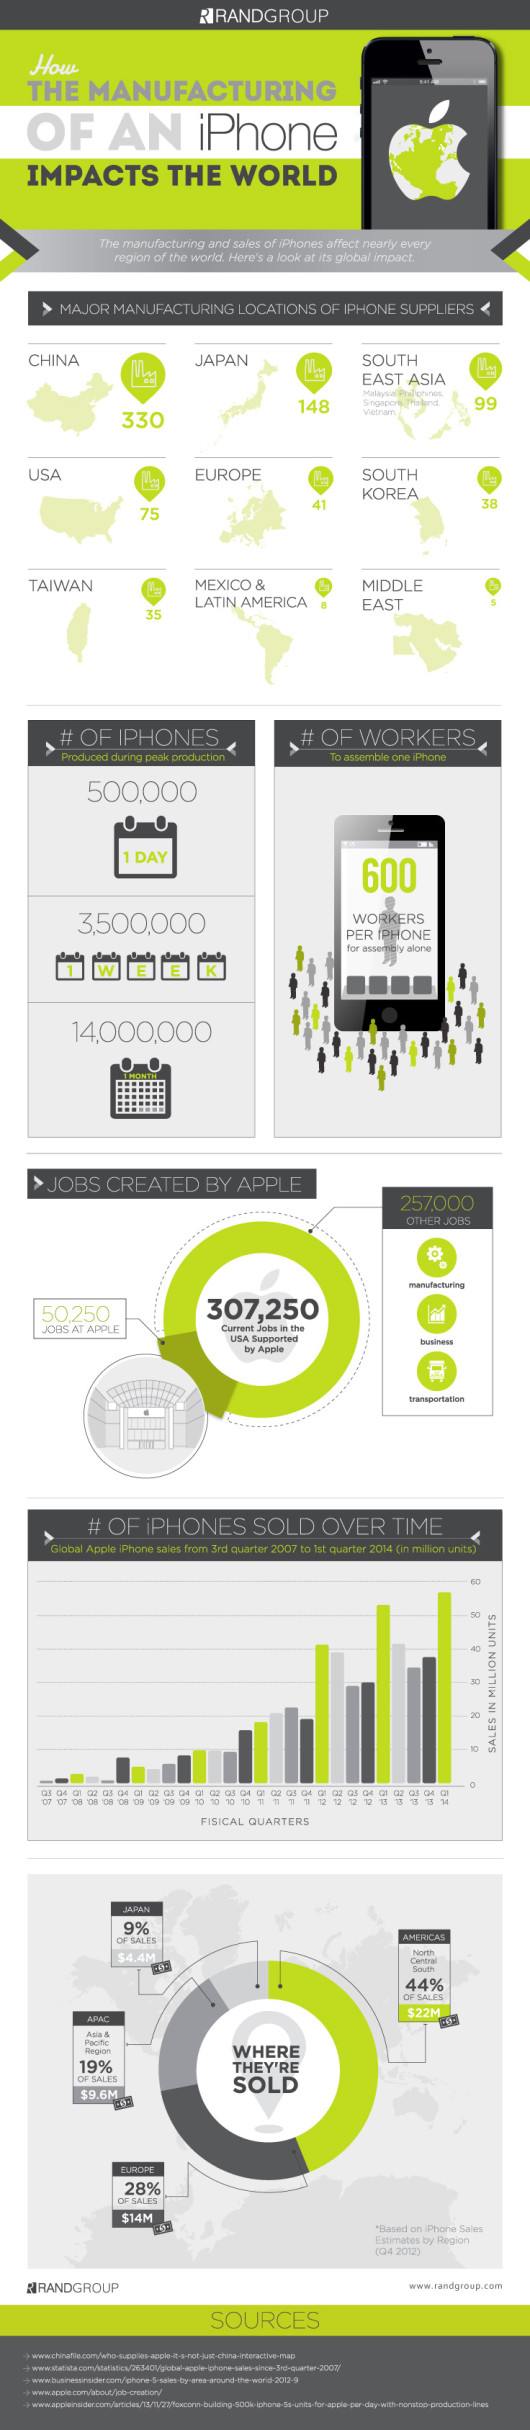 iPhone-manufacturing-infographic